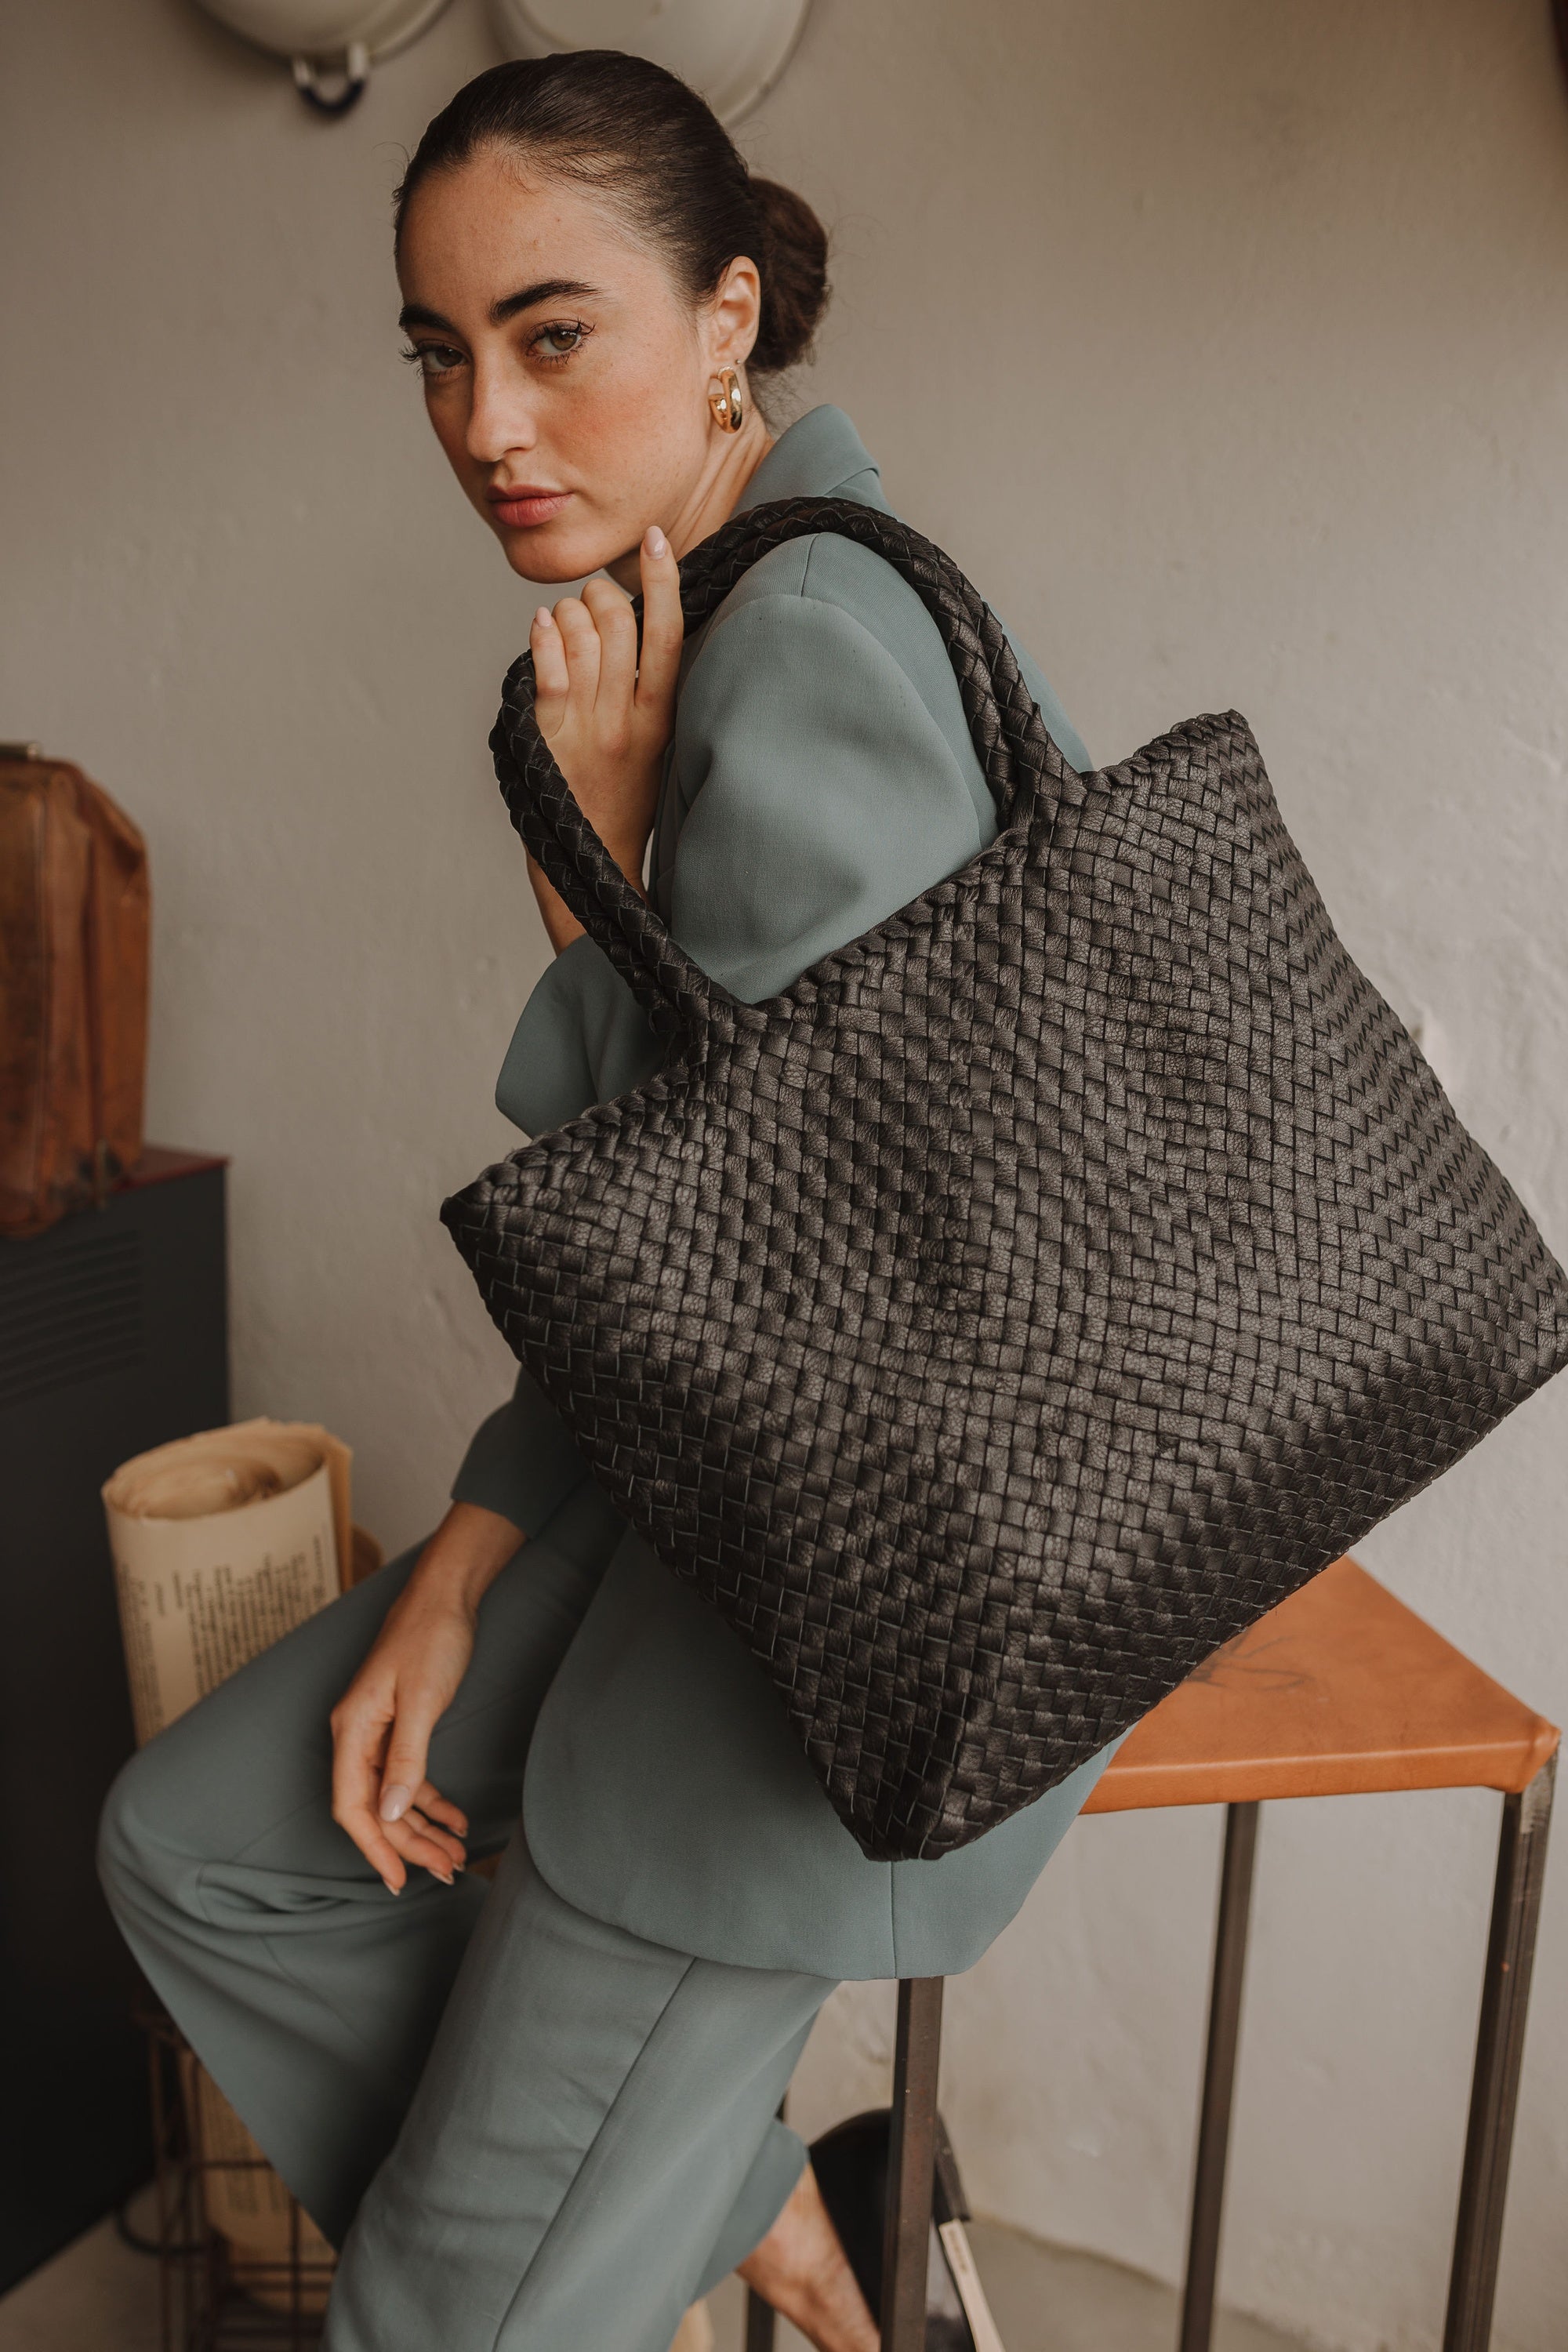 The Woven Leather Collection – MILANER